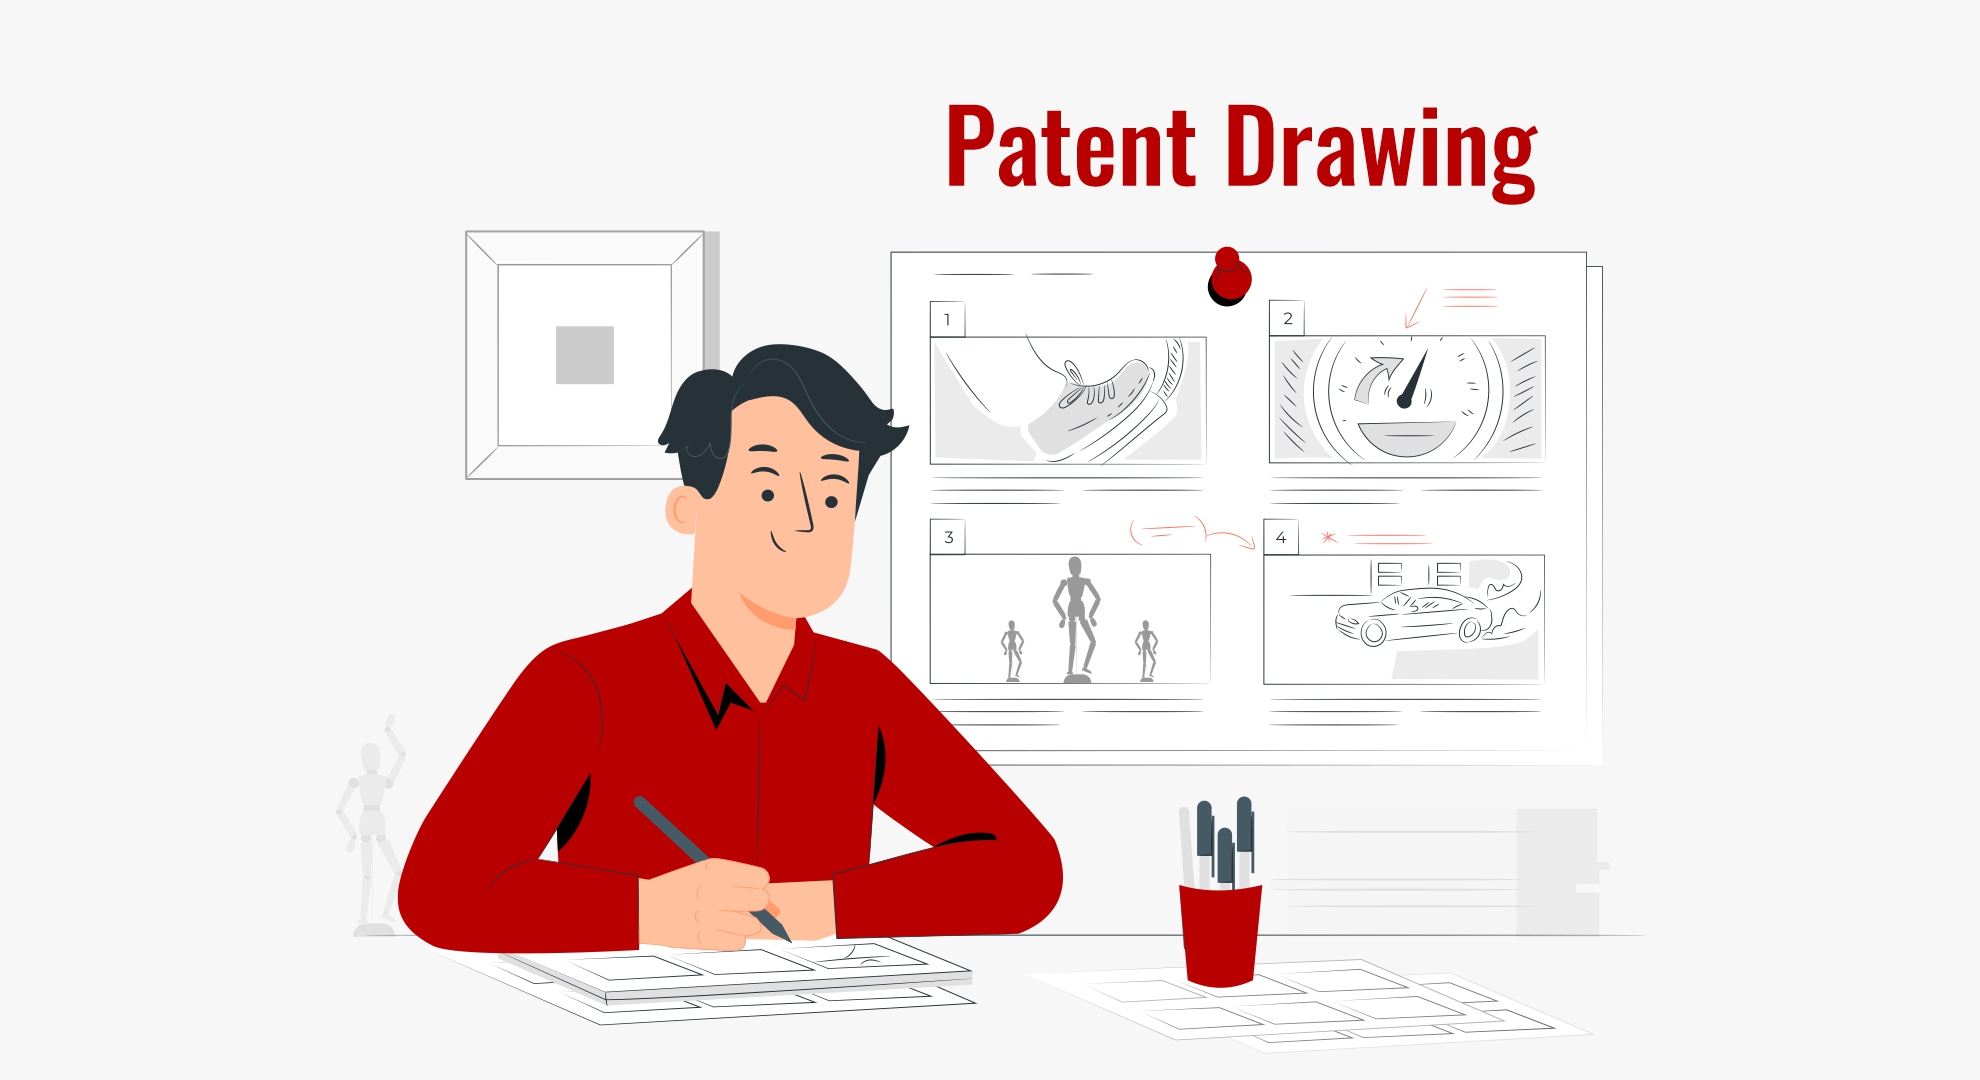 Patent Drawing services